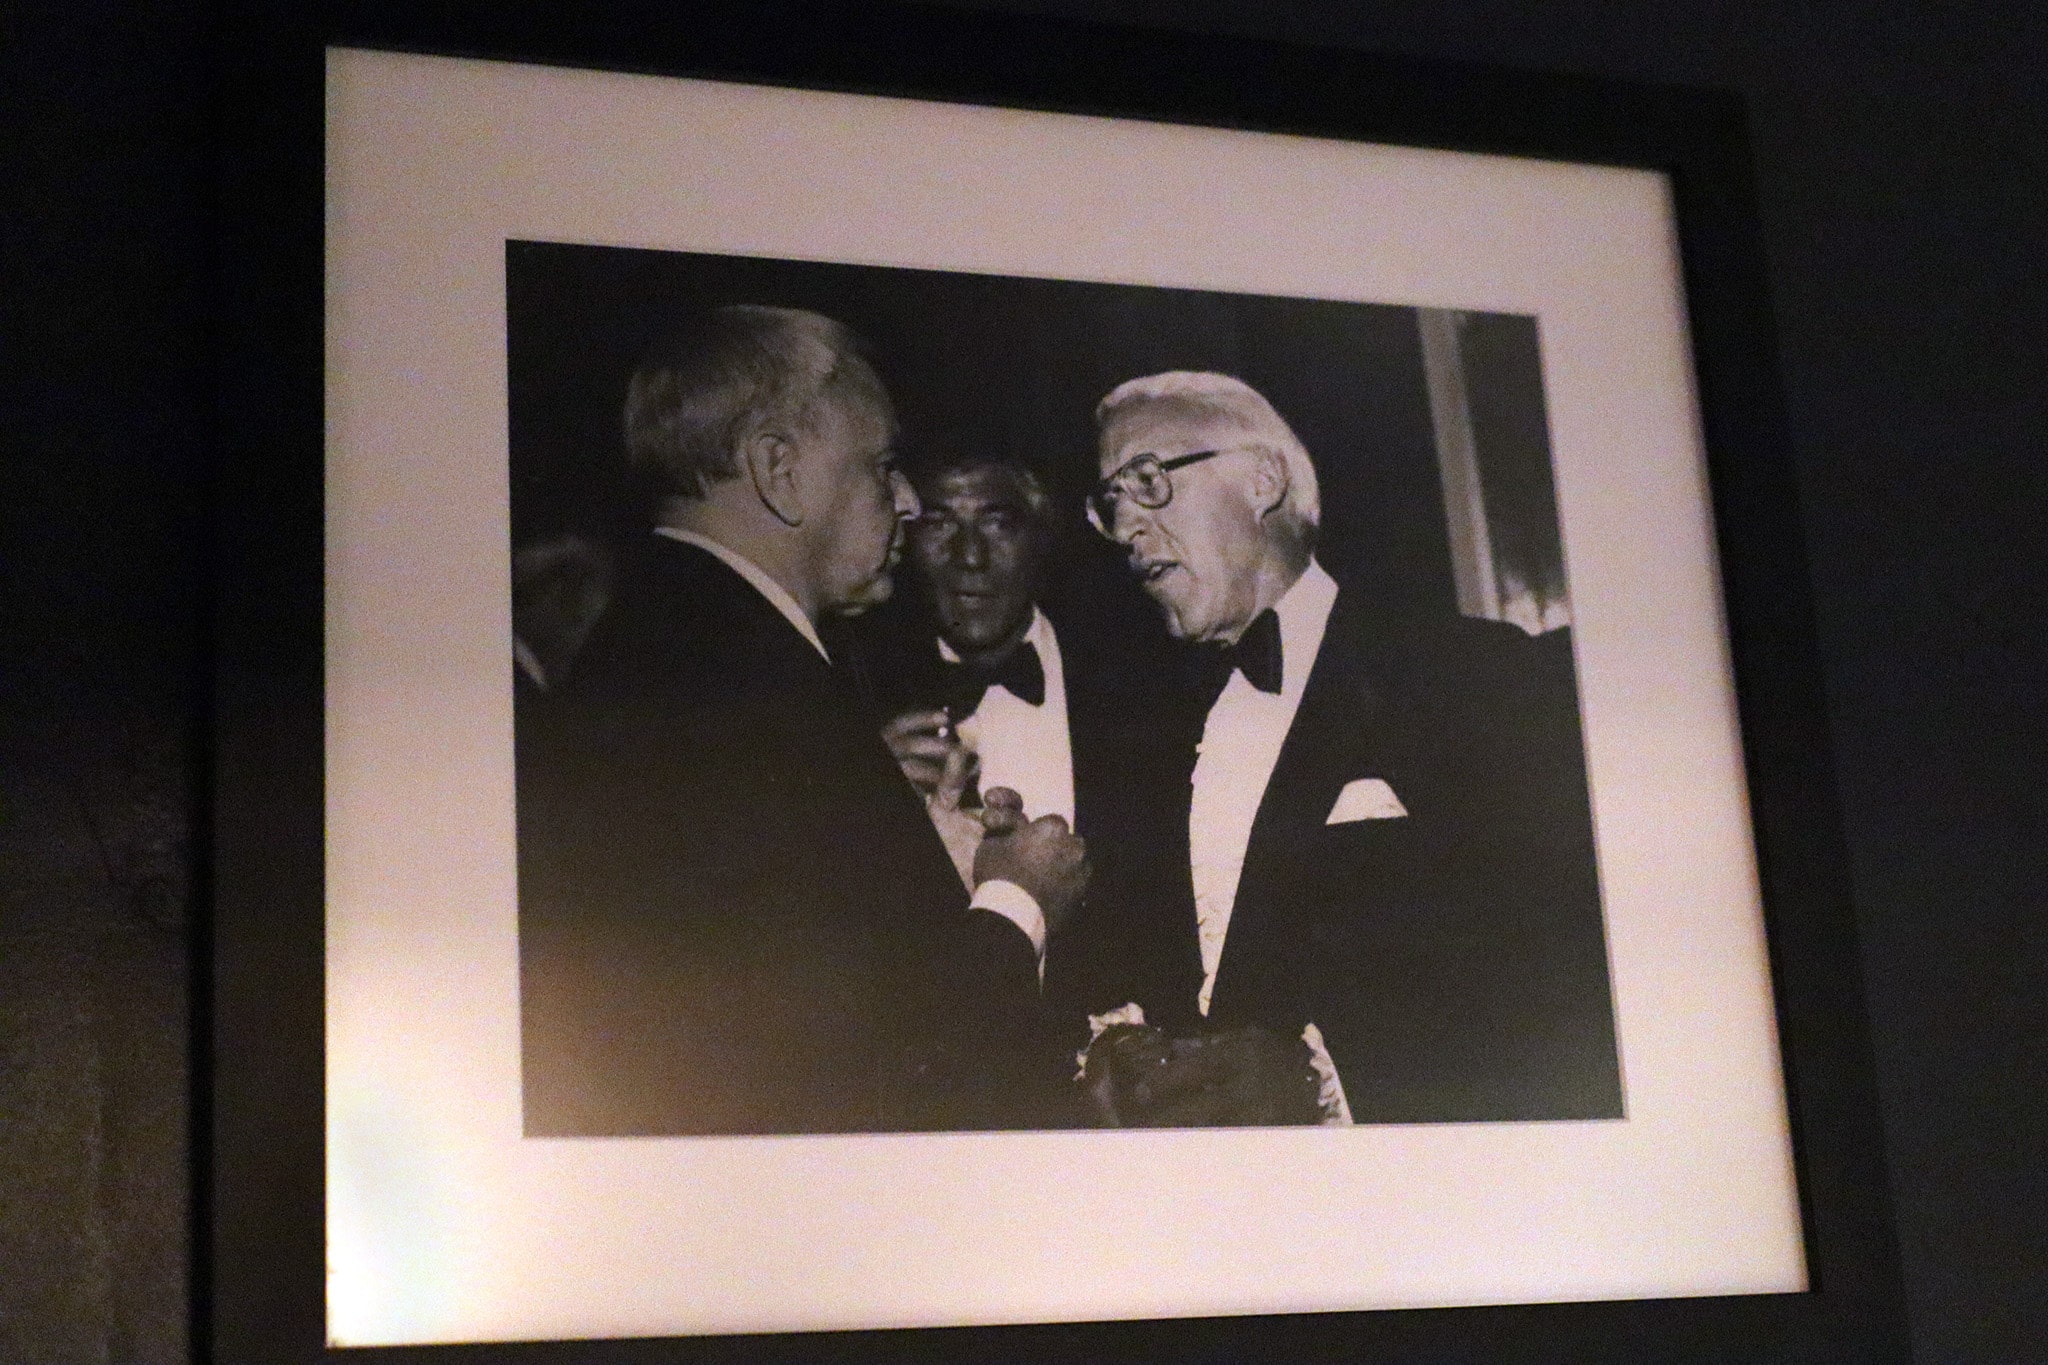 Black and white photograph displayed in a frame on a wall, capturing a moment where two older men in formal attire with bow ties are having a conversation. The man on the right appears to be gesturing with his hand while talking to the man on the left.